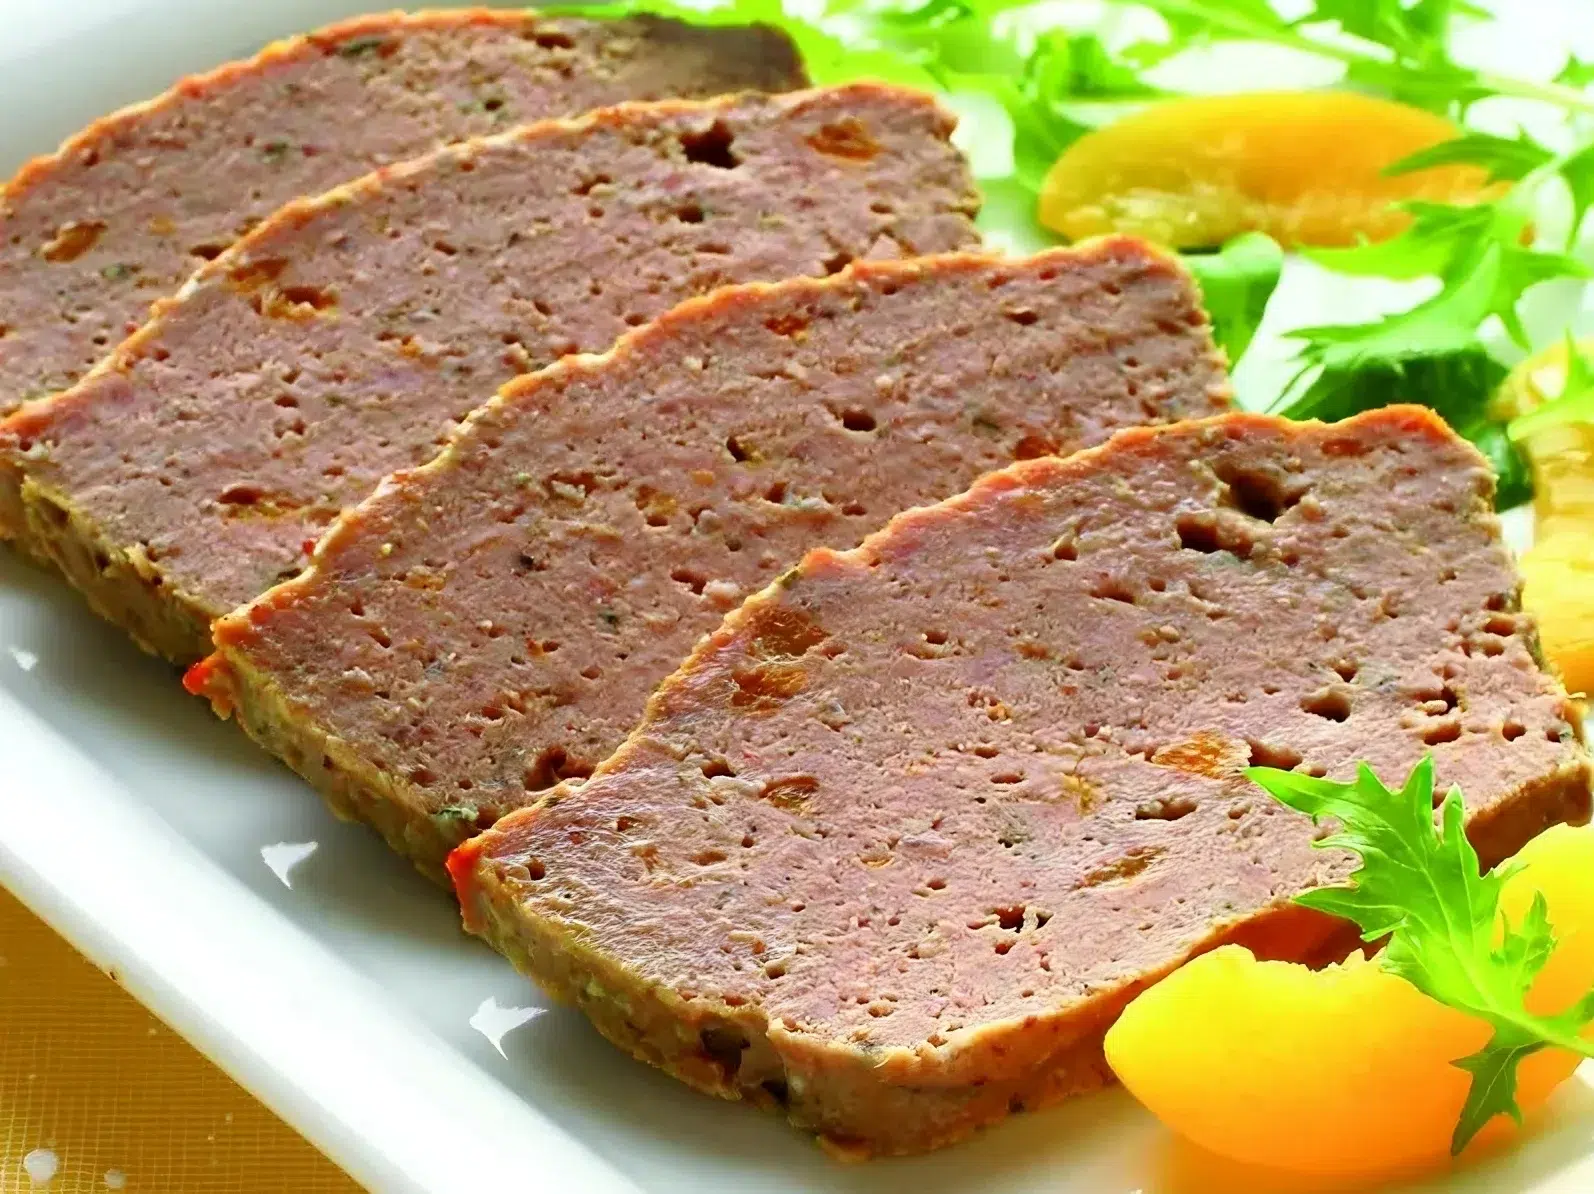 4 slices of what it appears to be a souse loaf